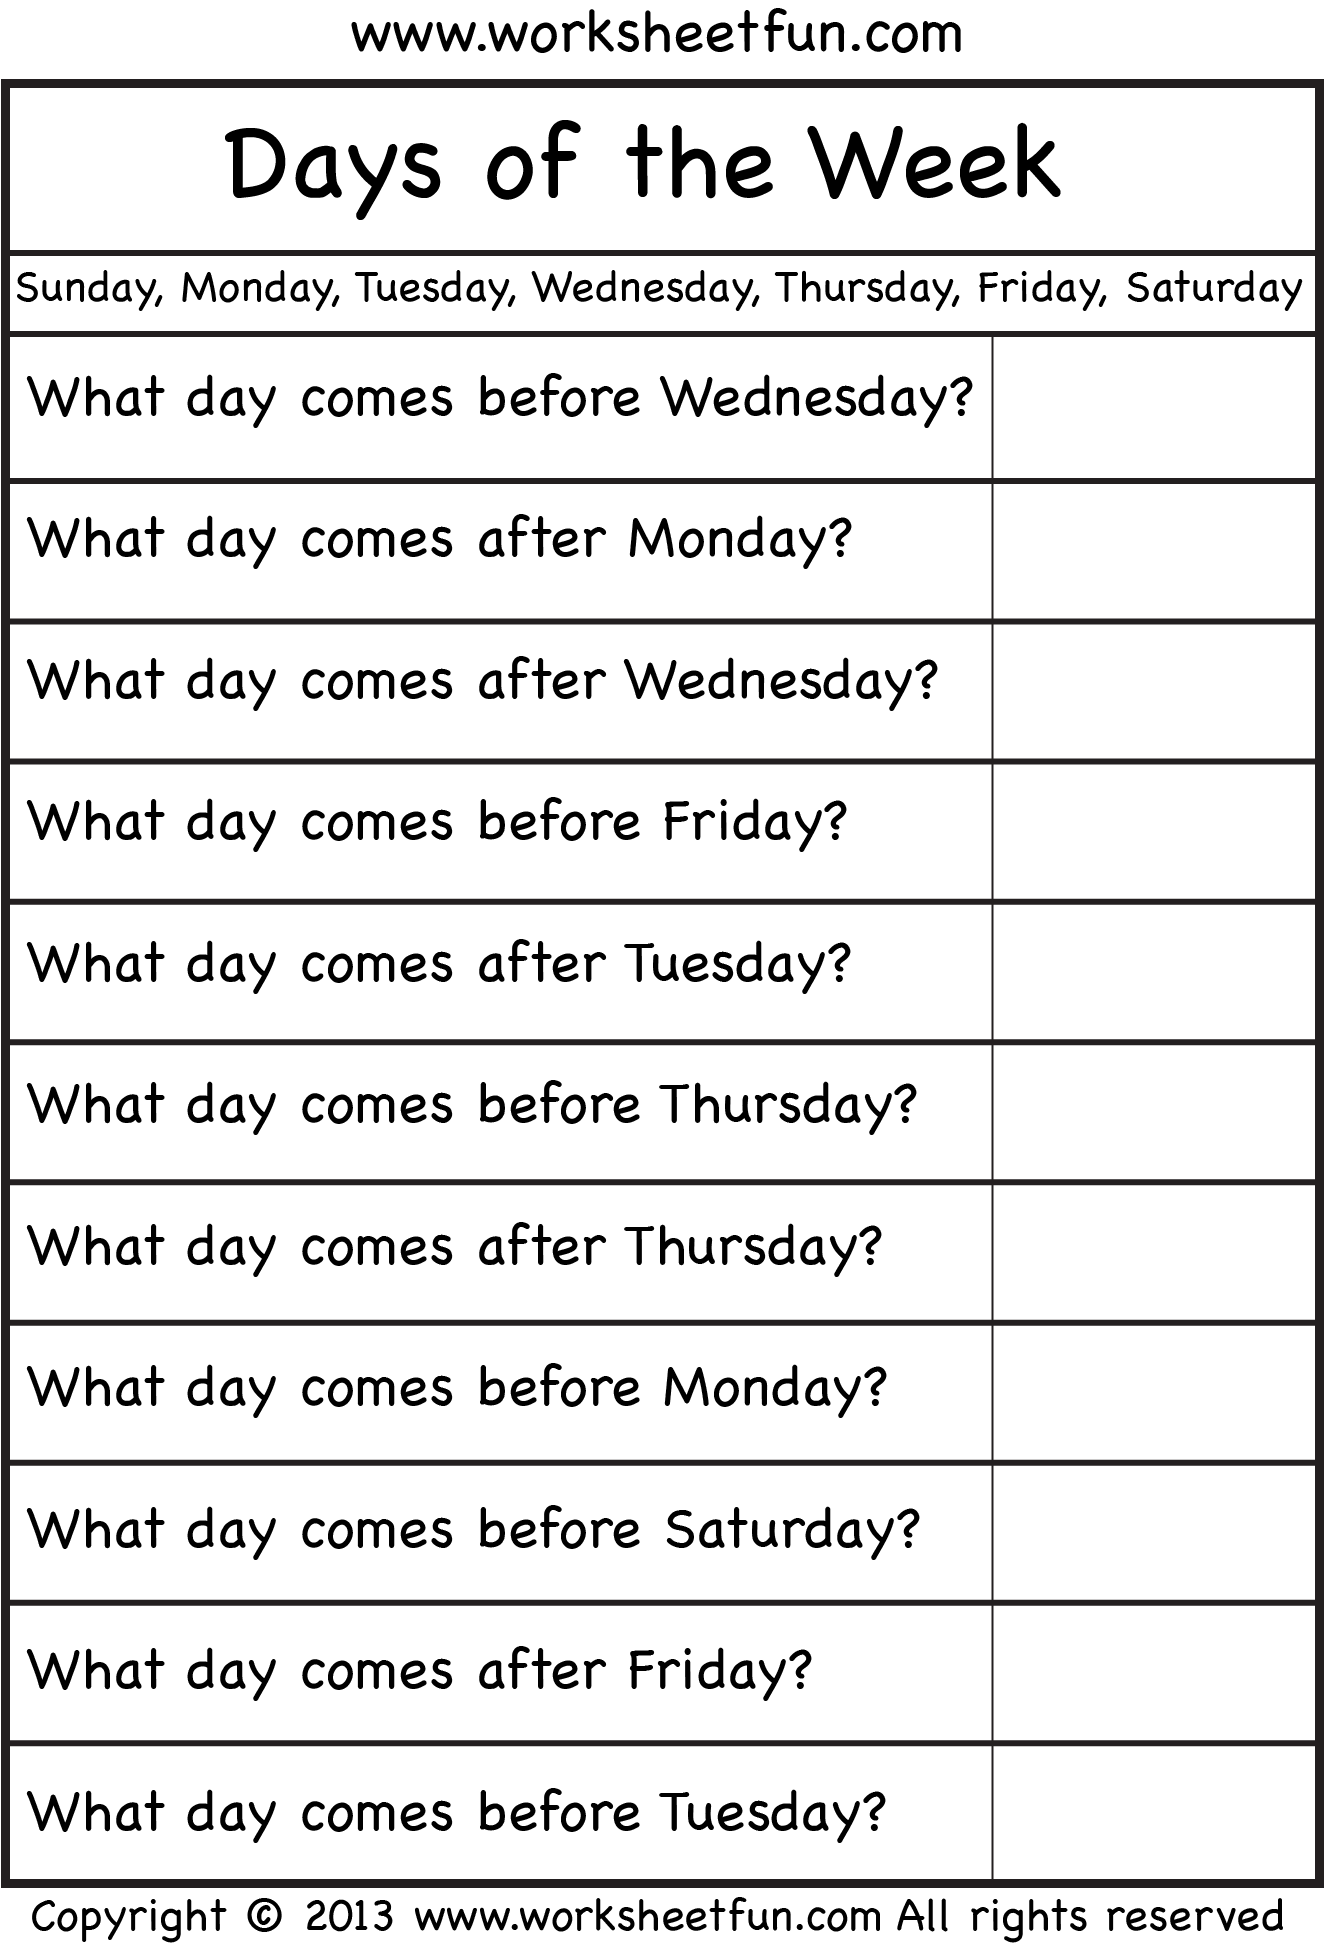 days-of-the-week-tracing-worksheets-alphabetworksheetsfreecom-days-of-the-week-tracing